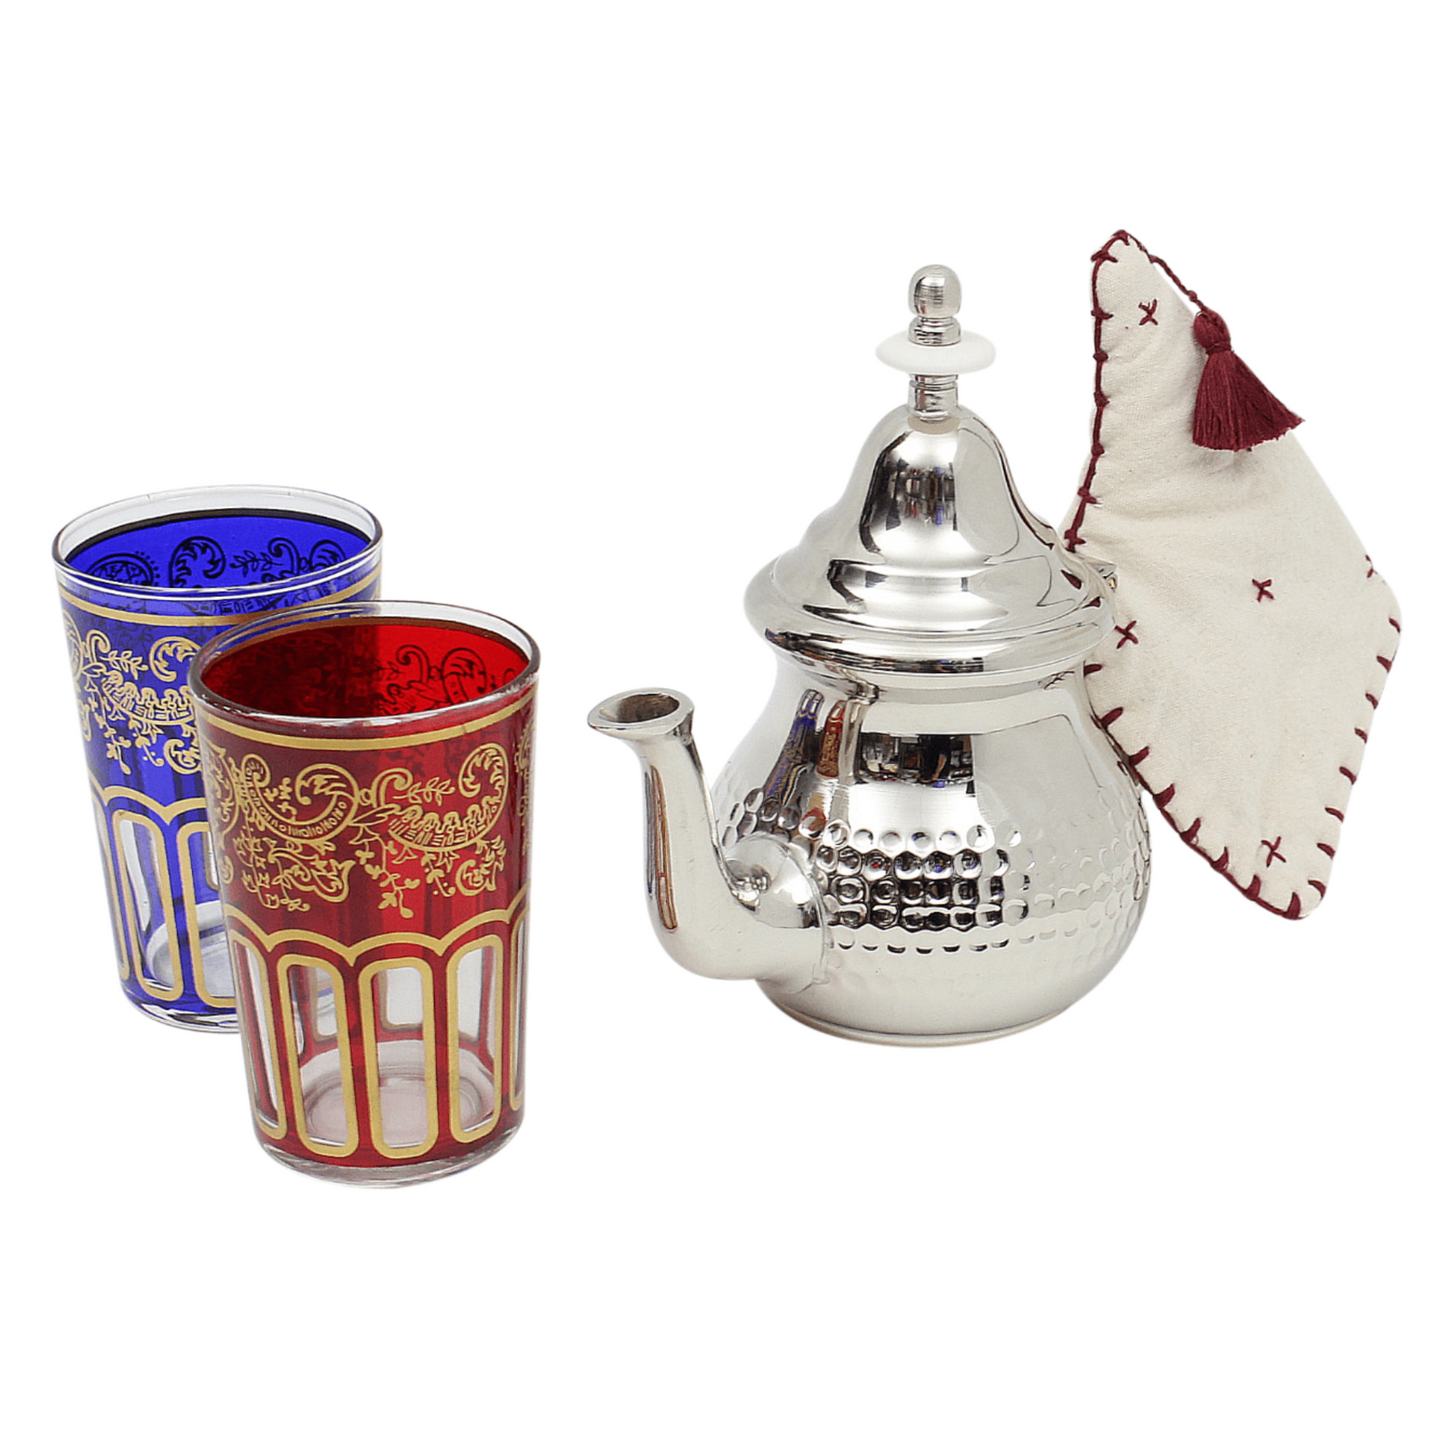 Moroccan Silver Teapot Hammered Small with 2 Tea Glasses and Handle Cover Handmade